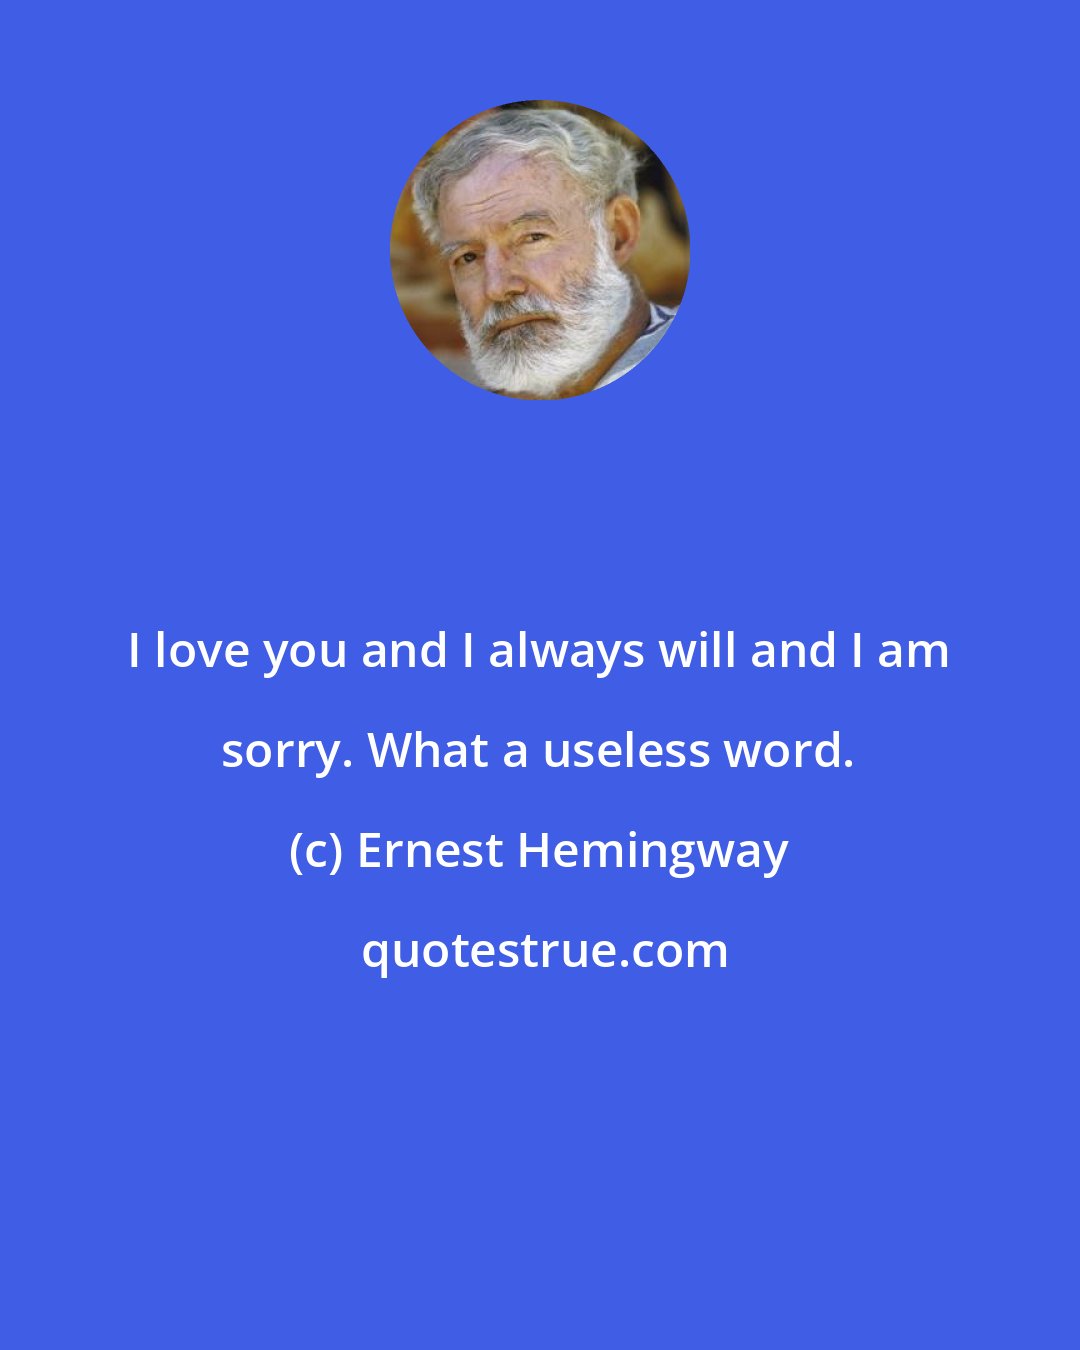 Ernest Hemingway: I love you and I always will and I am sorry. What a useless word.